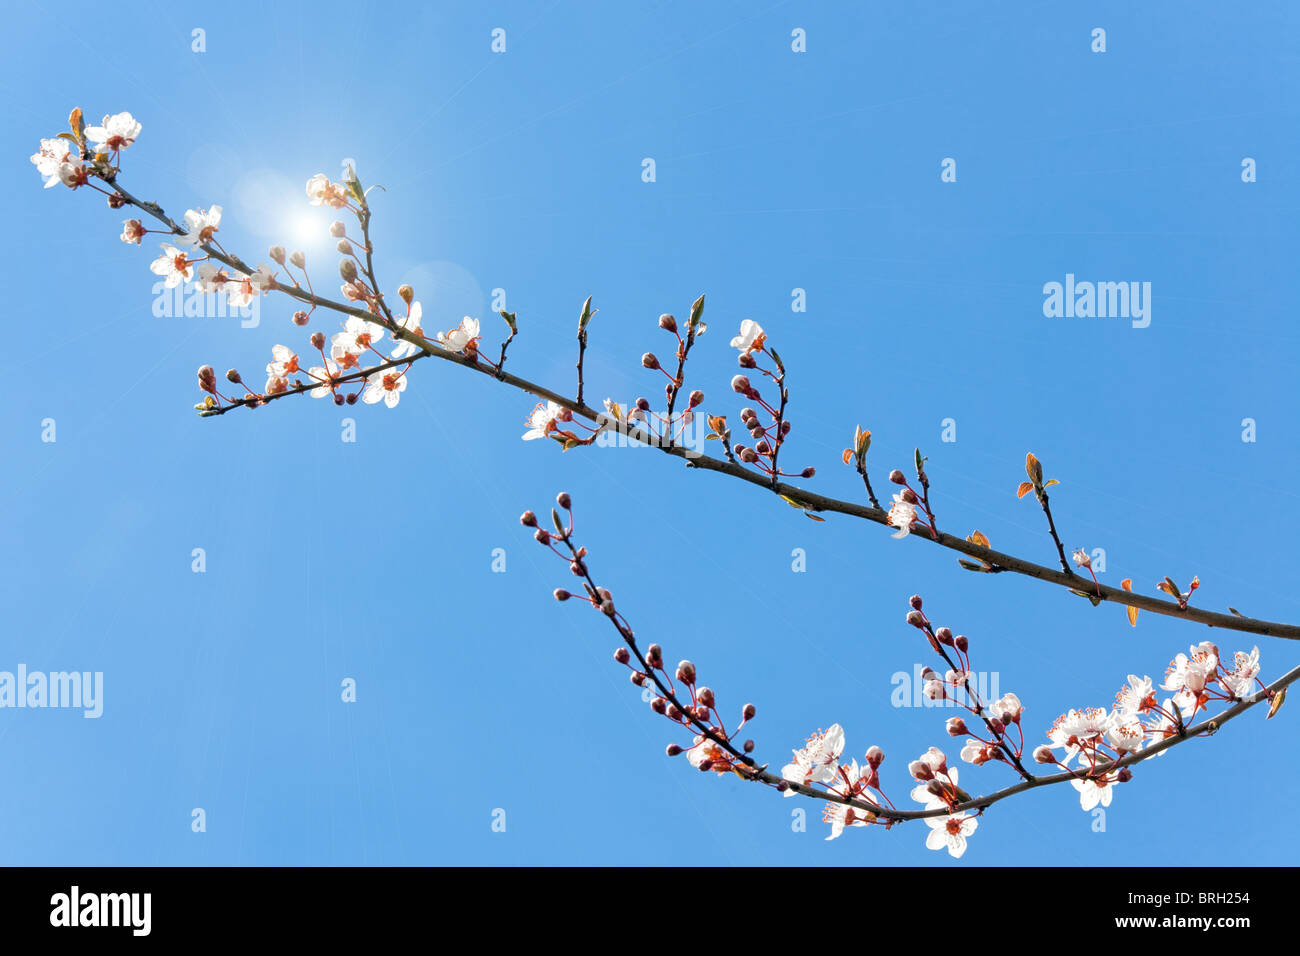 plum tree flowers and buds with sun shining under clear blue sky Stock Photo